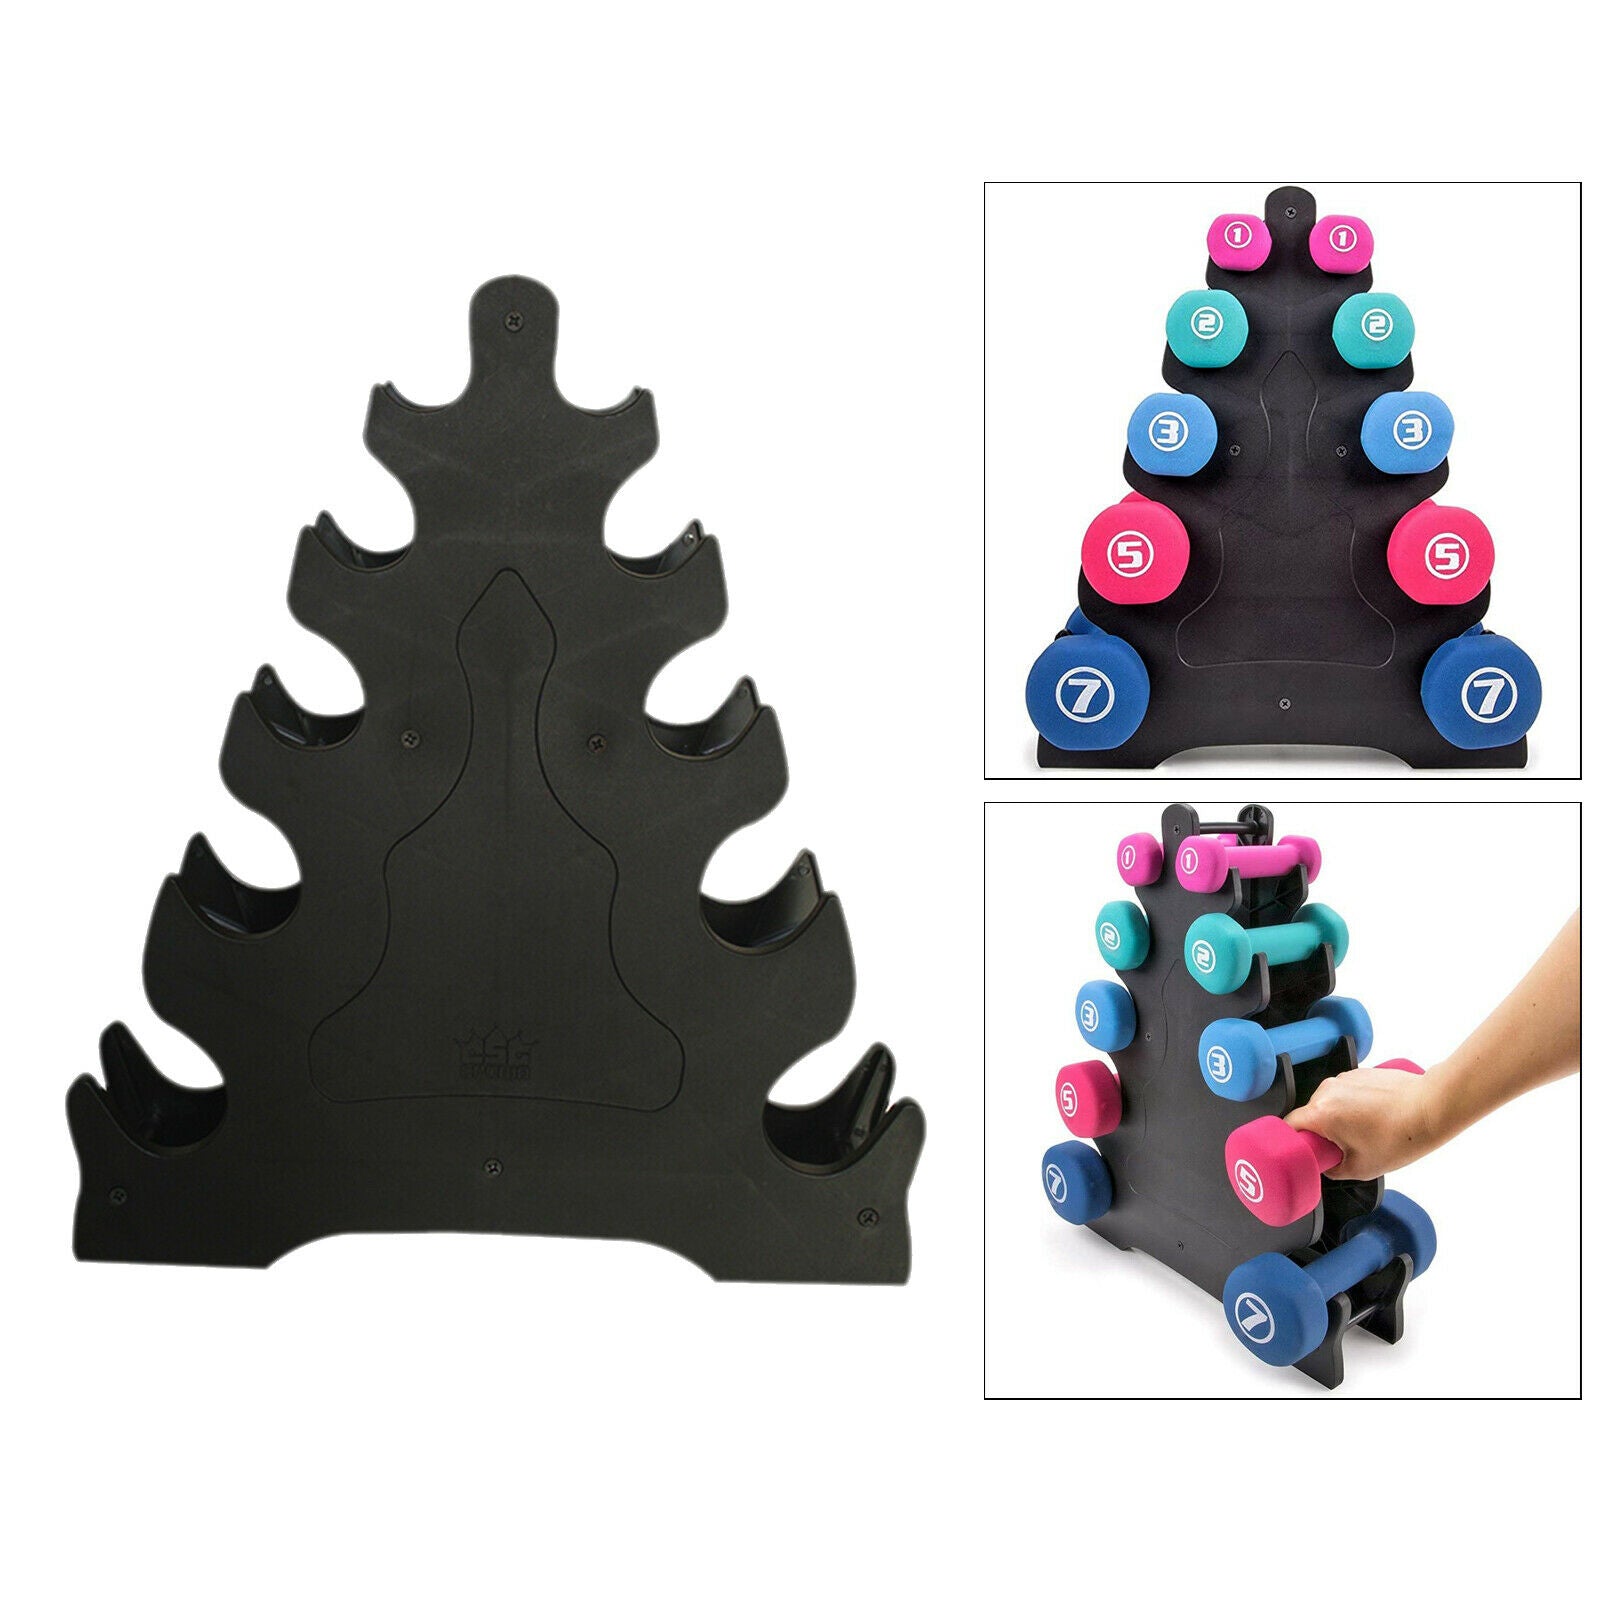 2X Compact Dumbbell Rack Sport Equipment Space Saving Office Gym Organizer